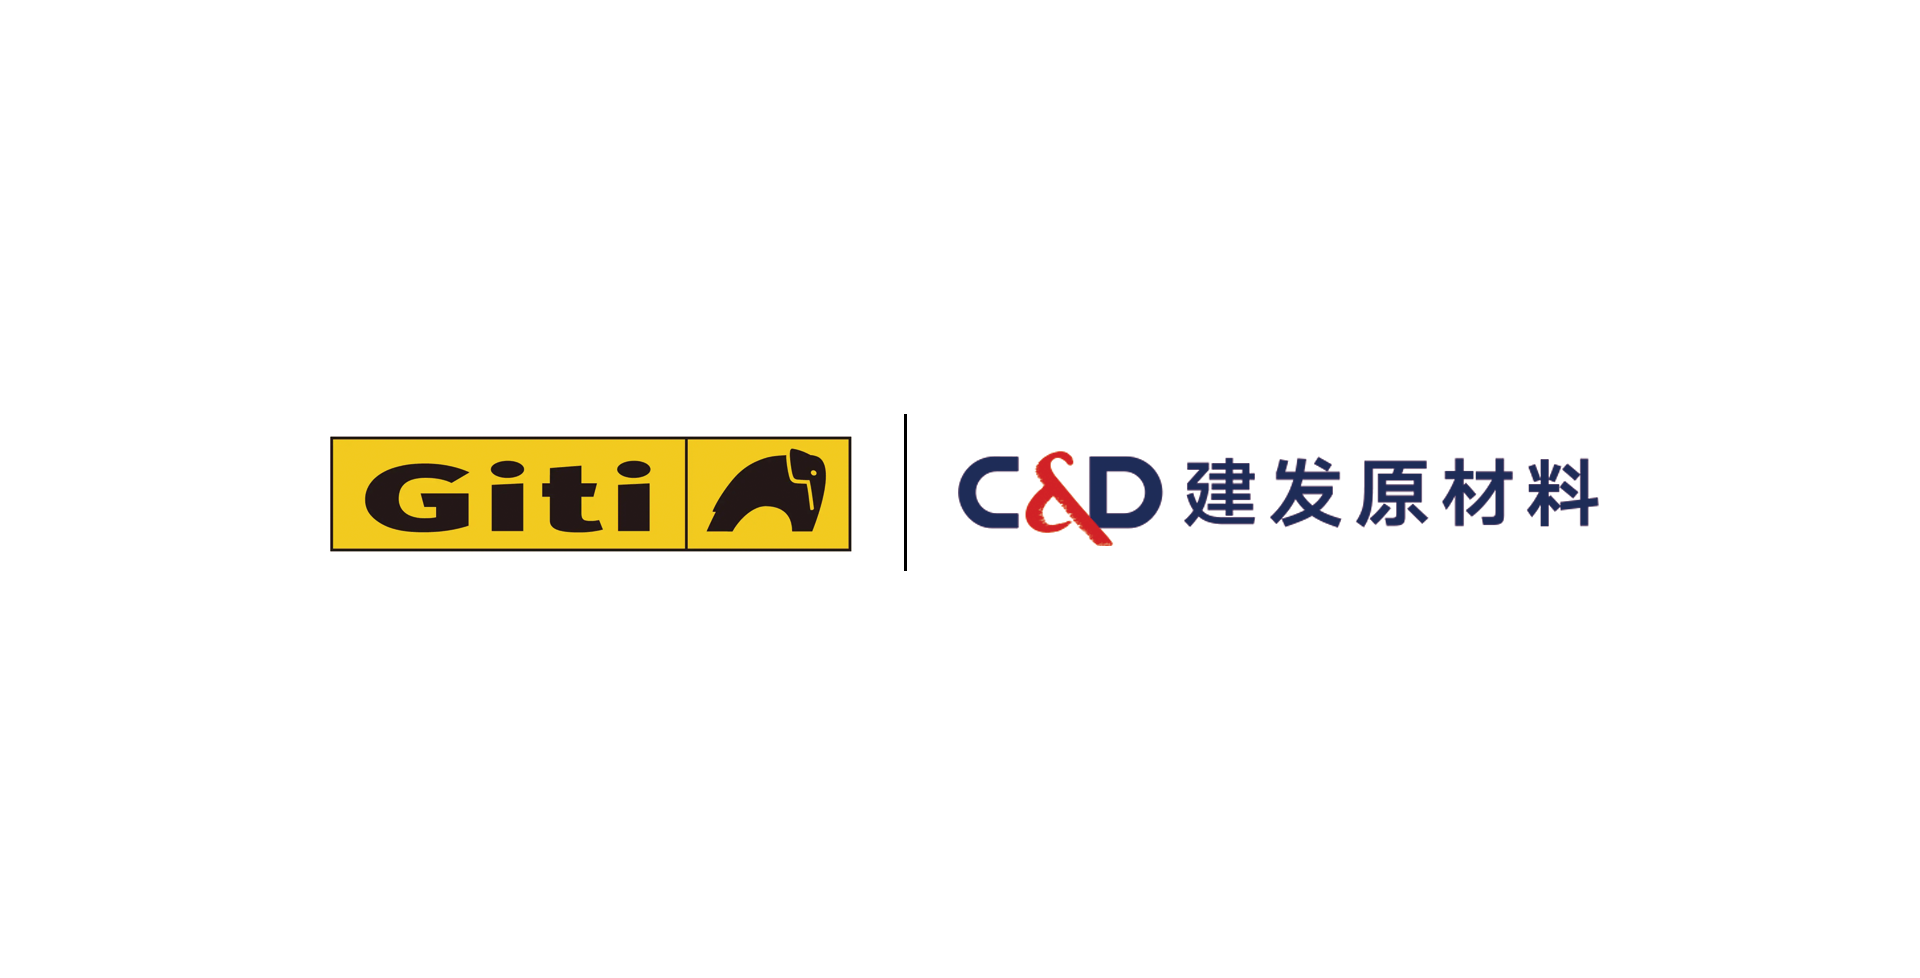 C&D Commodity Trading Granted Supplier Access to Internationally Renowned Tire Manufacturers and Achieved Regular Distribution